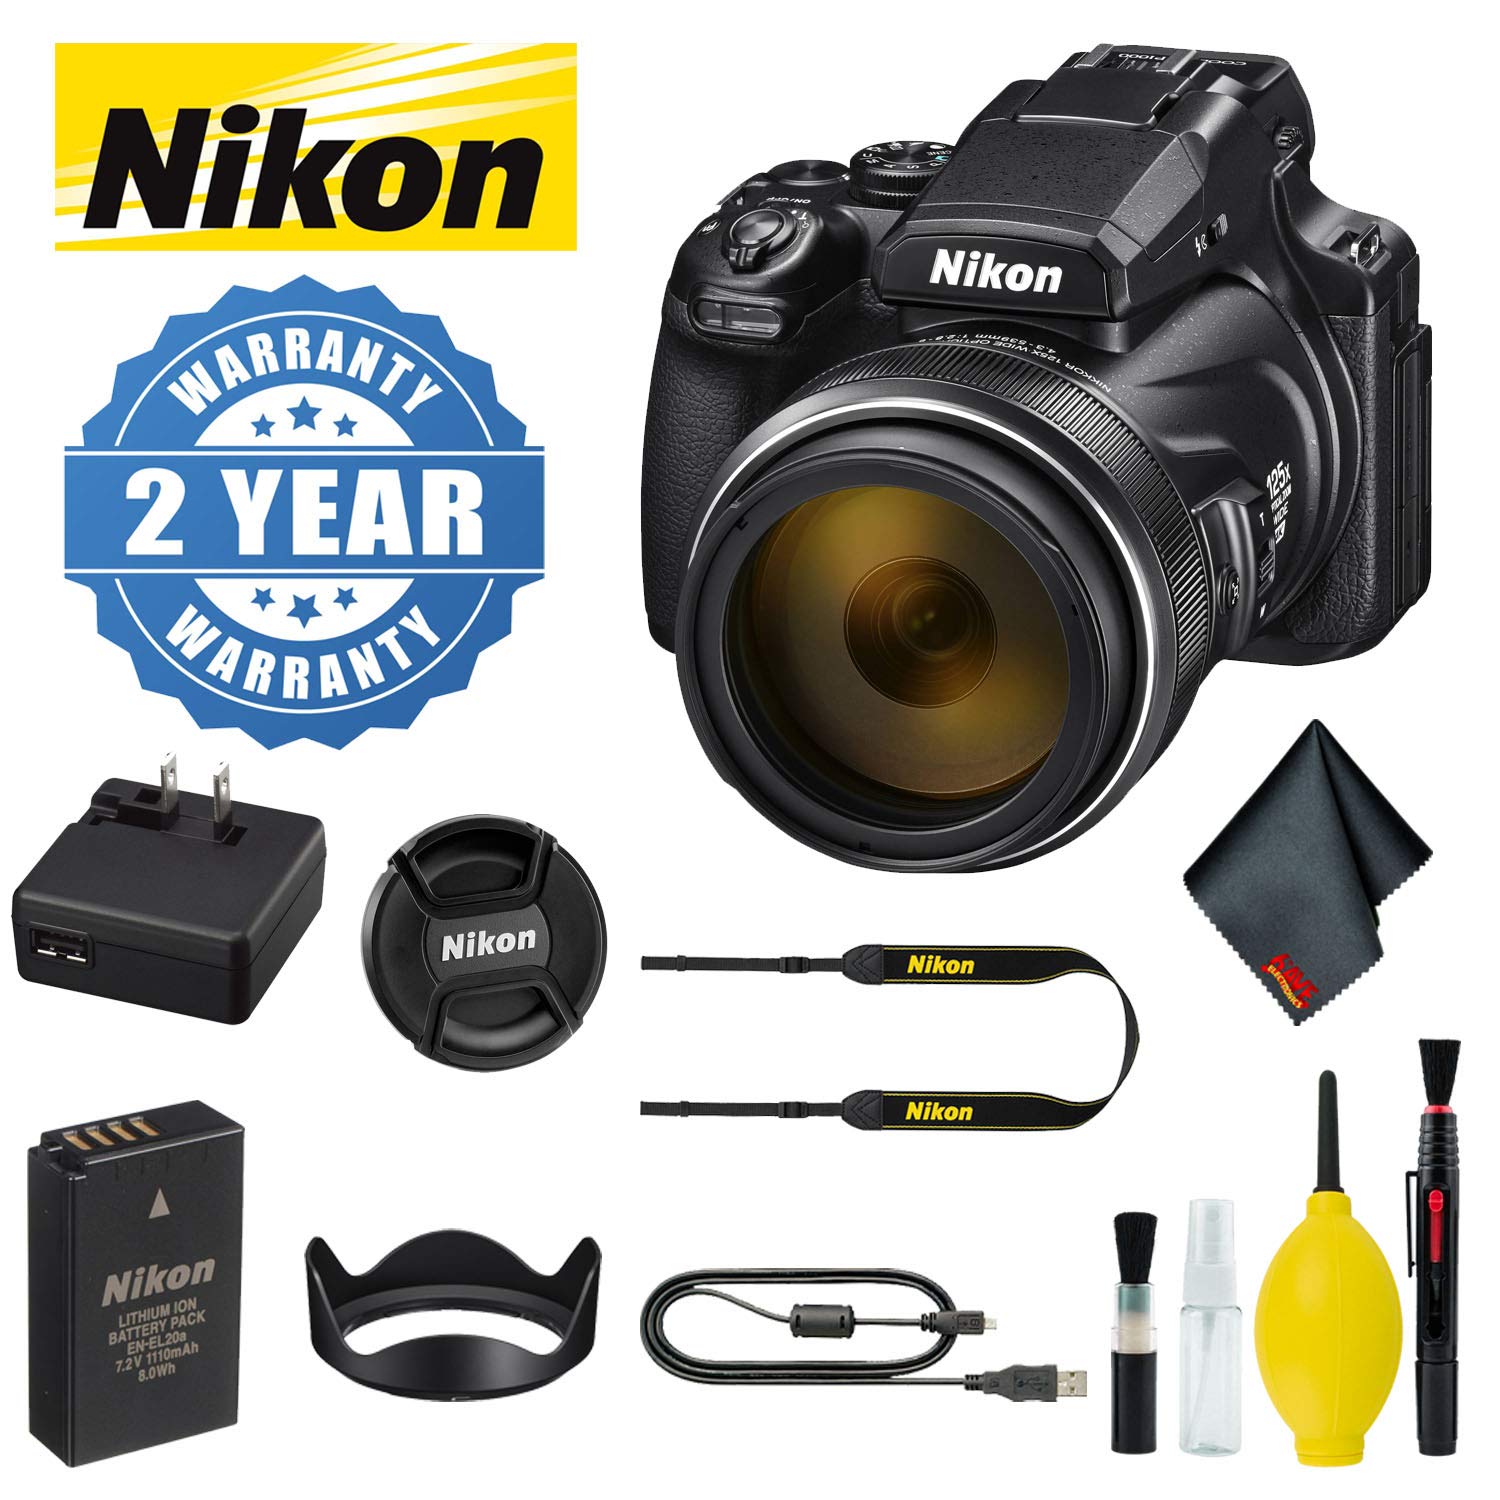 Nikon COOLPIX P1000 Digital Camera with 2 Year Extended Warranty and Cleaning Kit